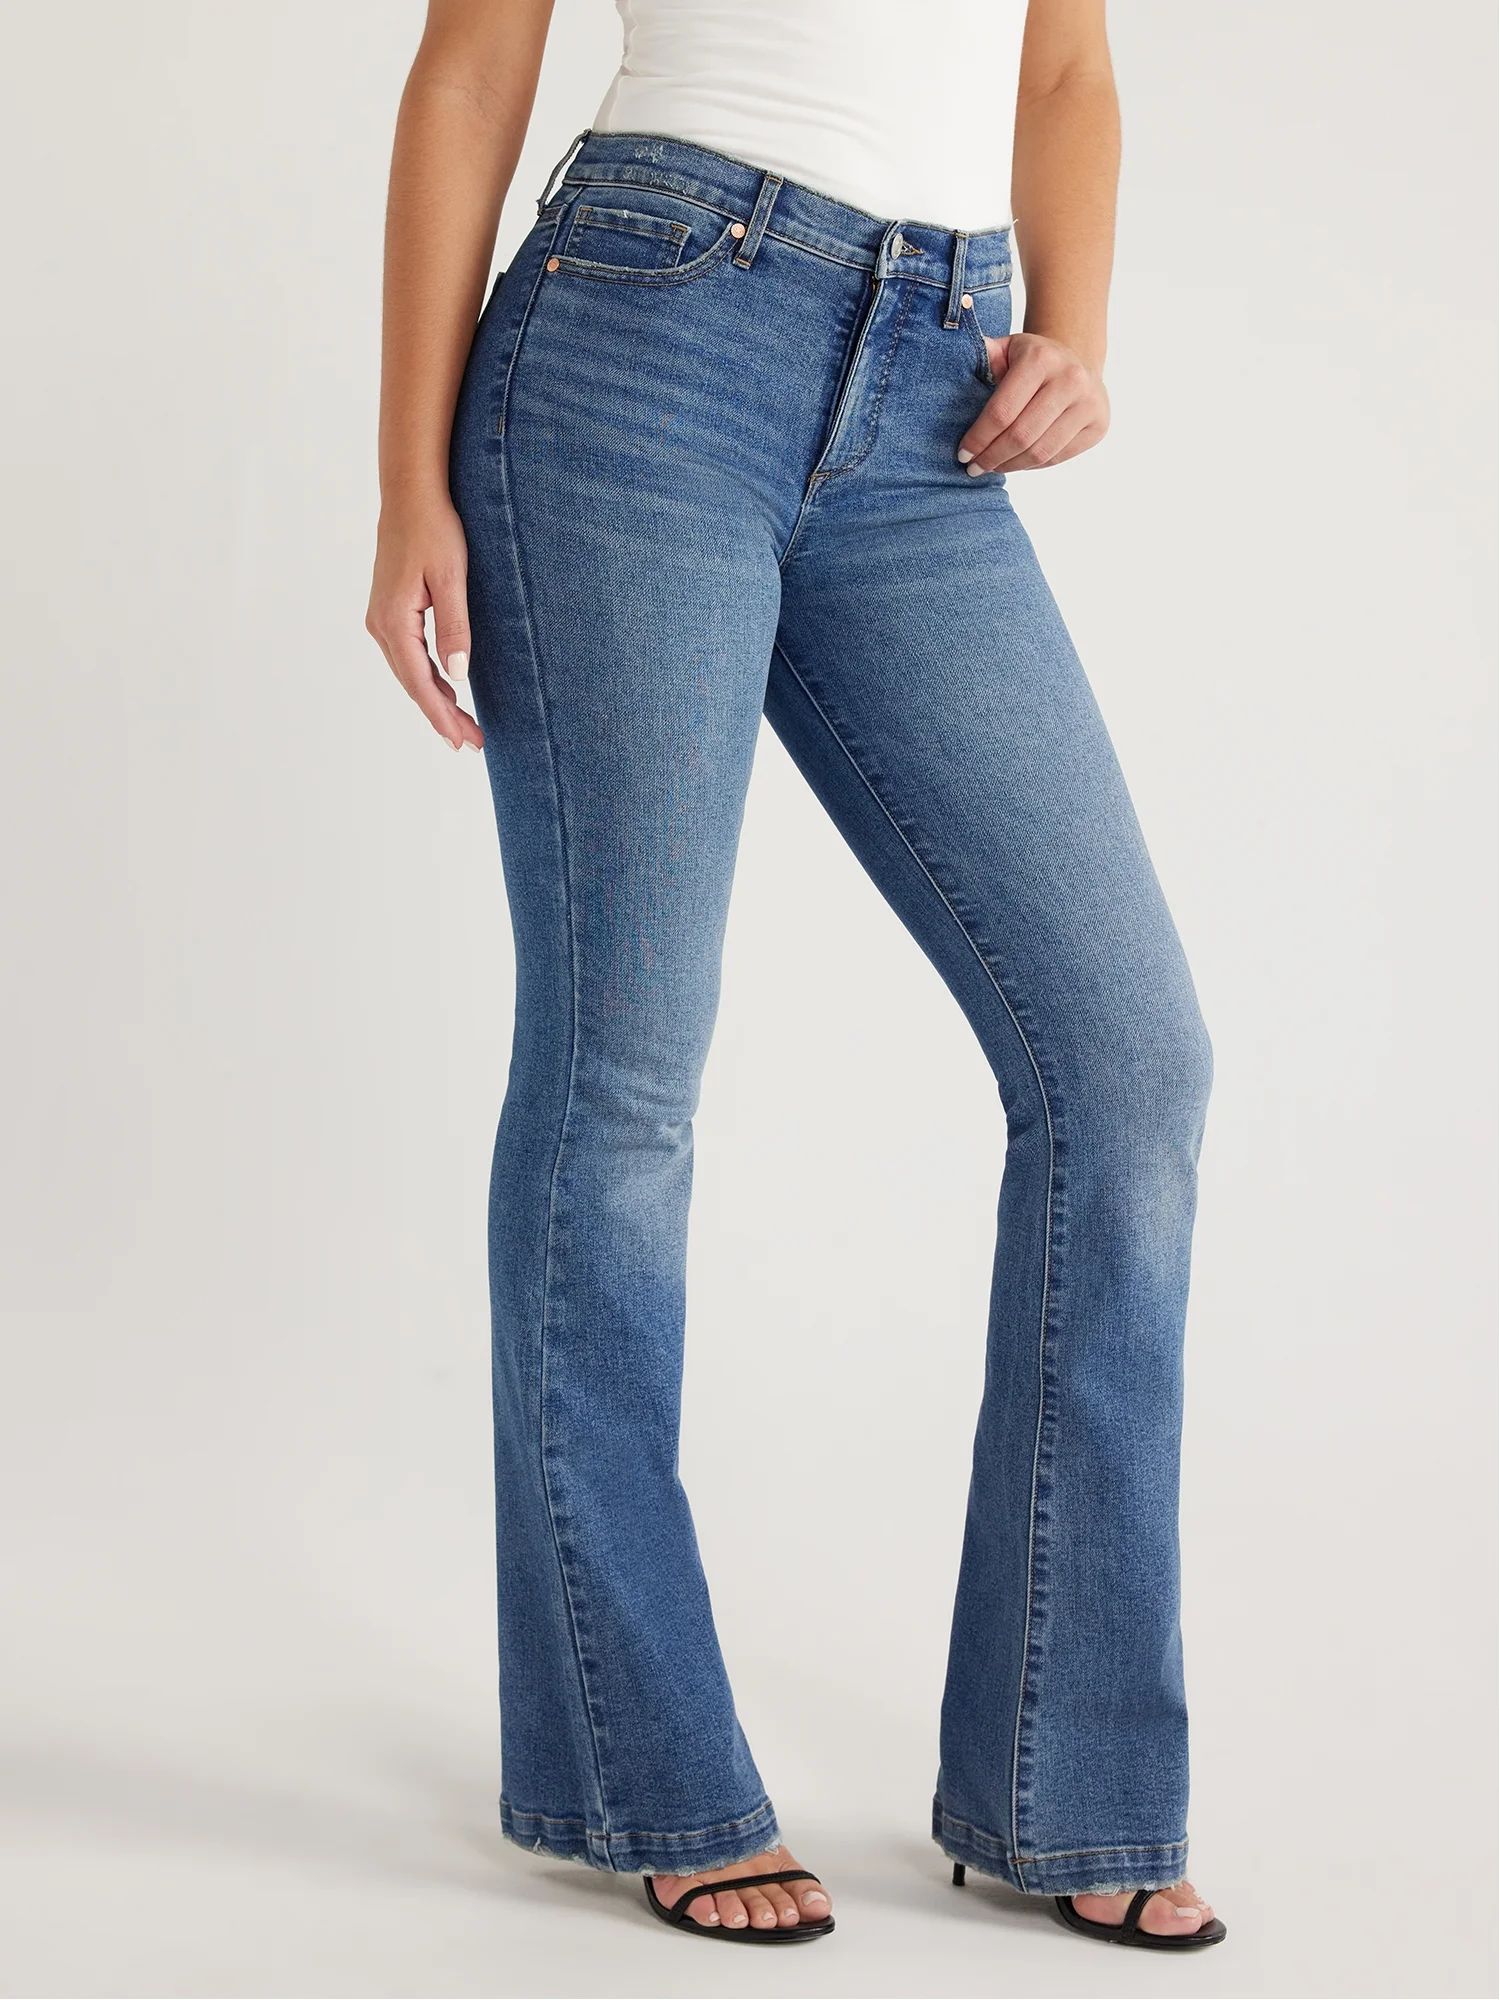 Sofia Jeans Women's and Women's Plus Melissa Flare High Rise Jeans,  Sizes 00- 28W | Walmart (US)